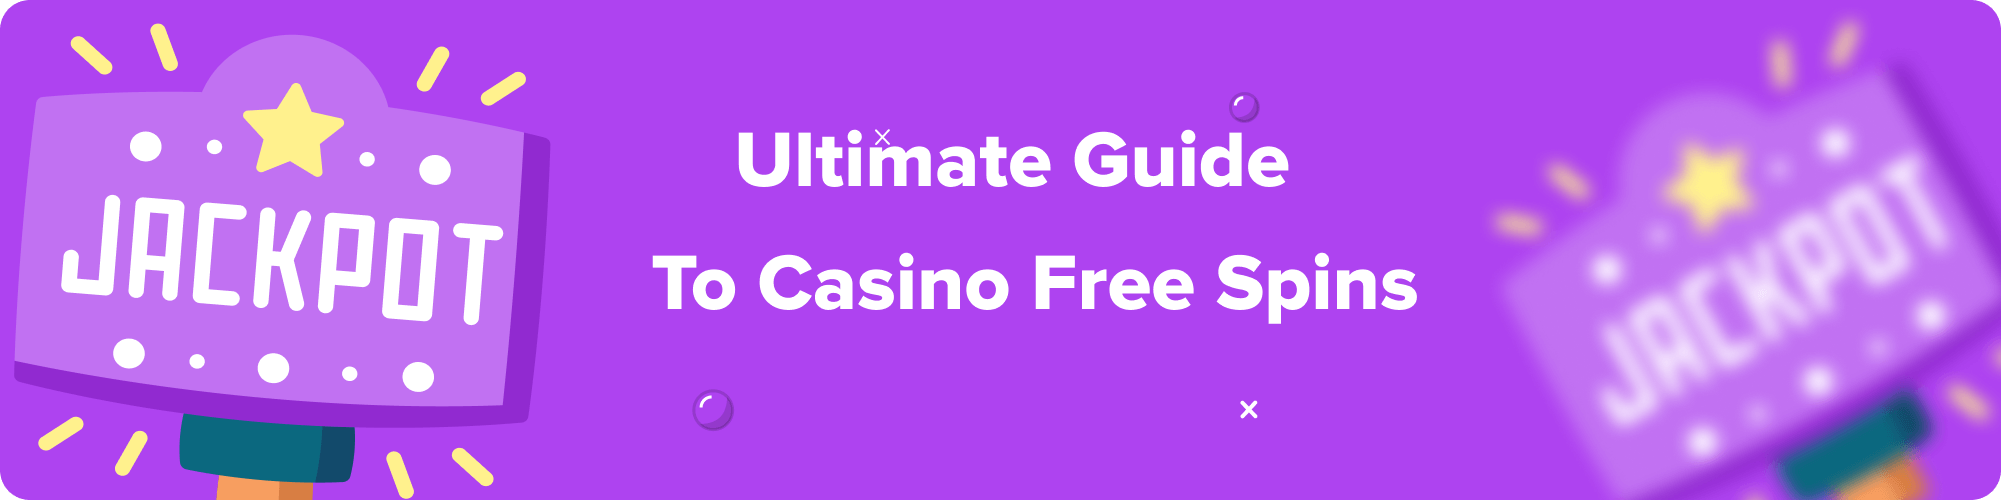 ultimate guide to casino free spins